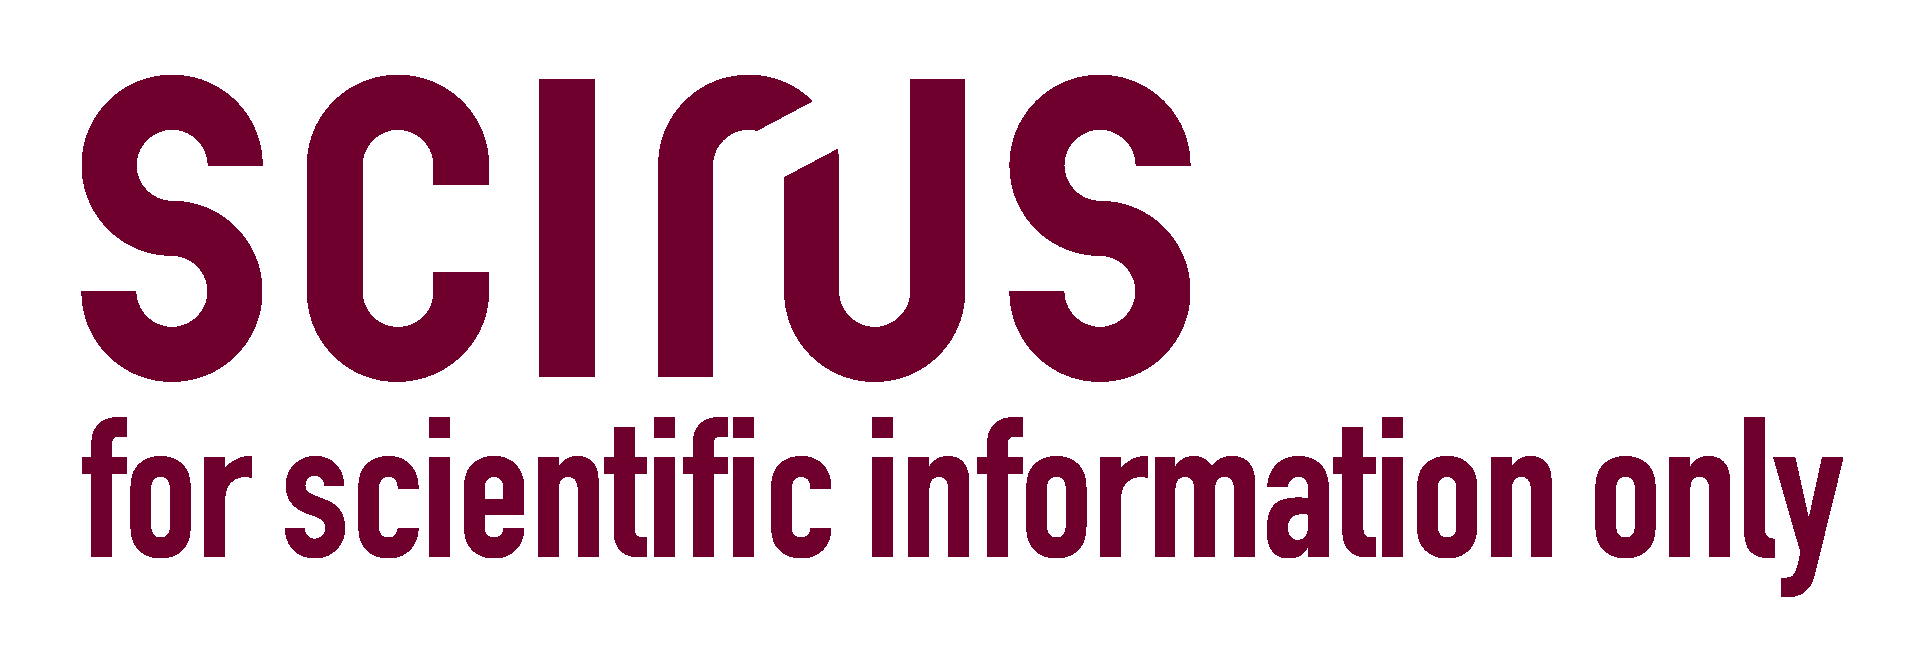 IARS' International Research Journal is now searched and listed by SCIRUS: For Scientific Information only.